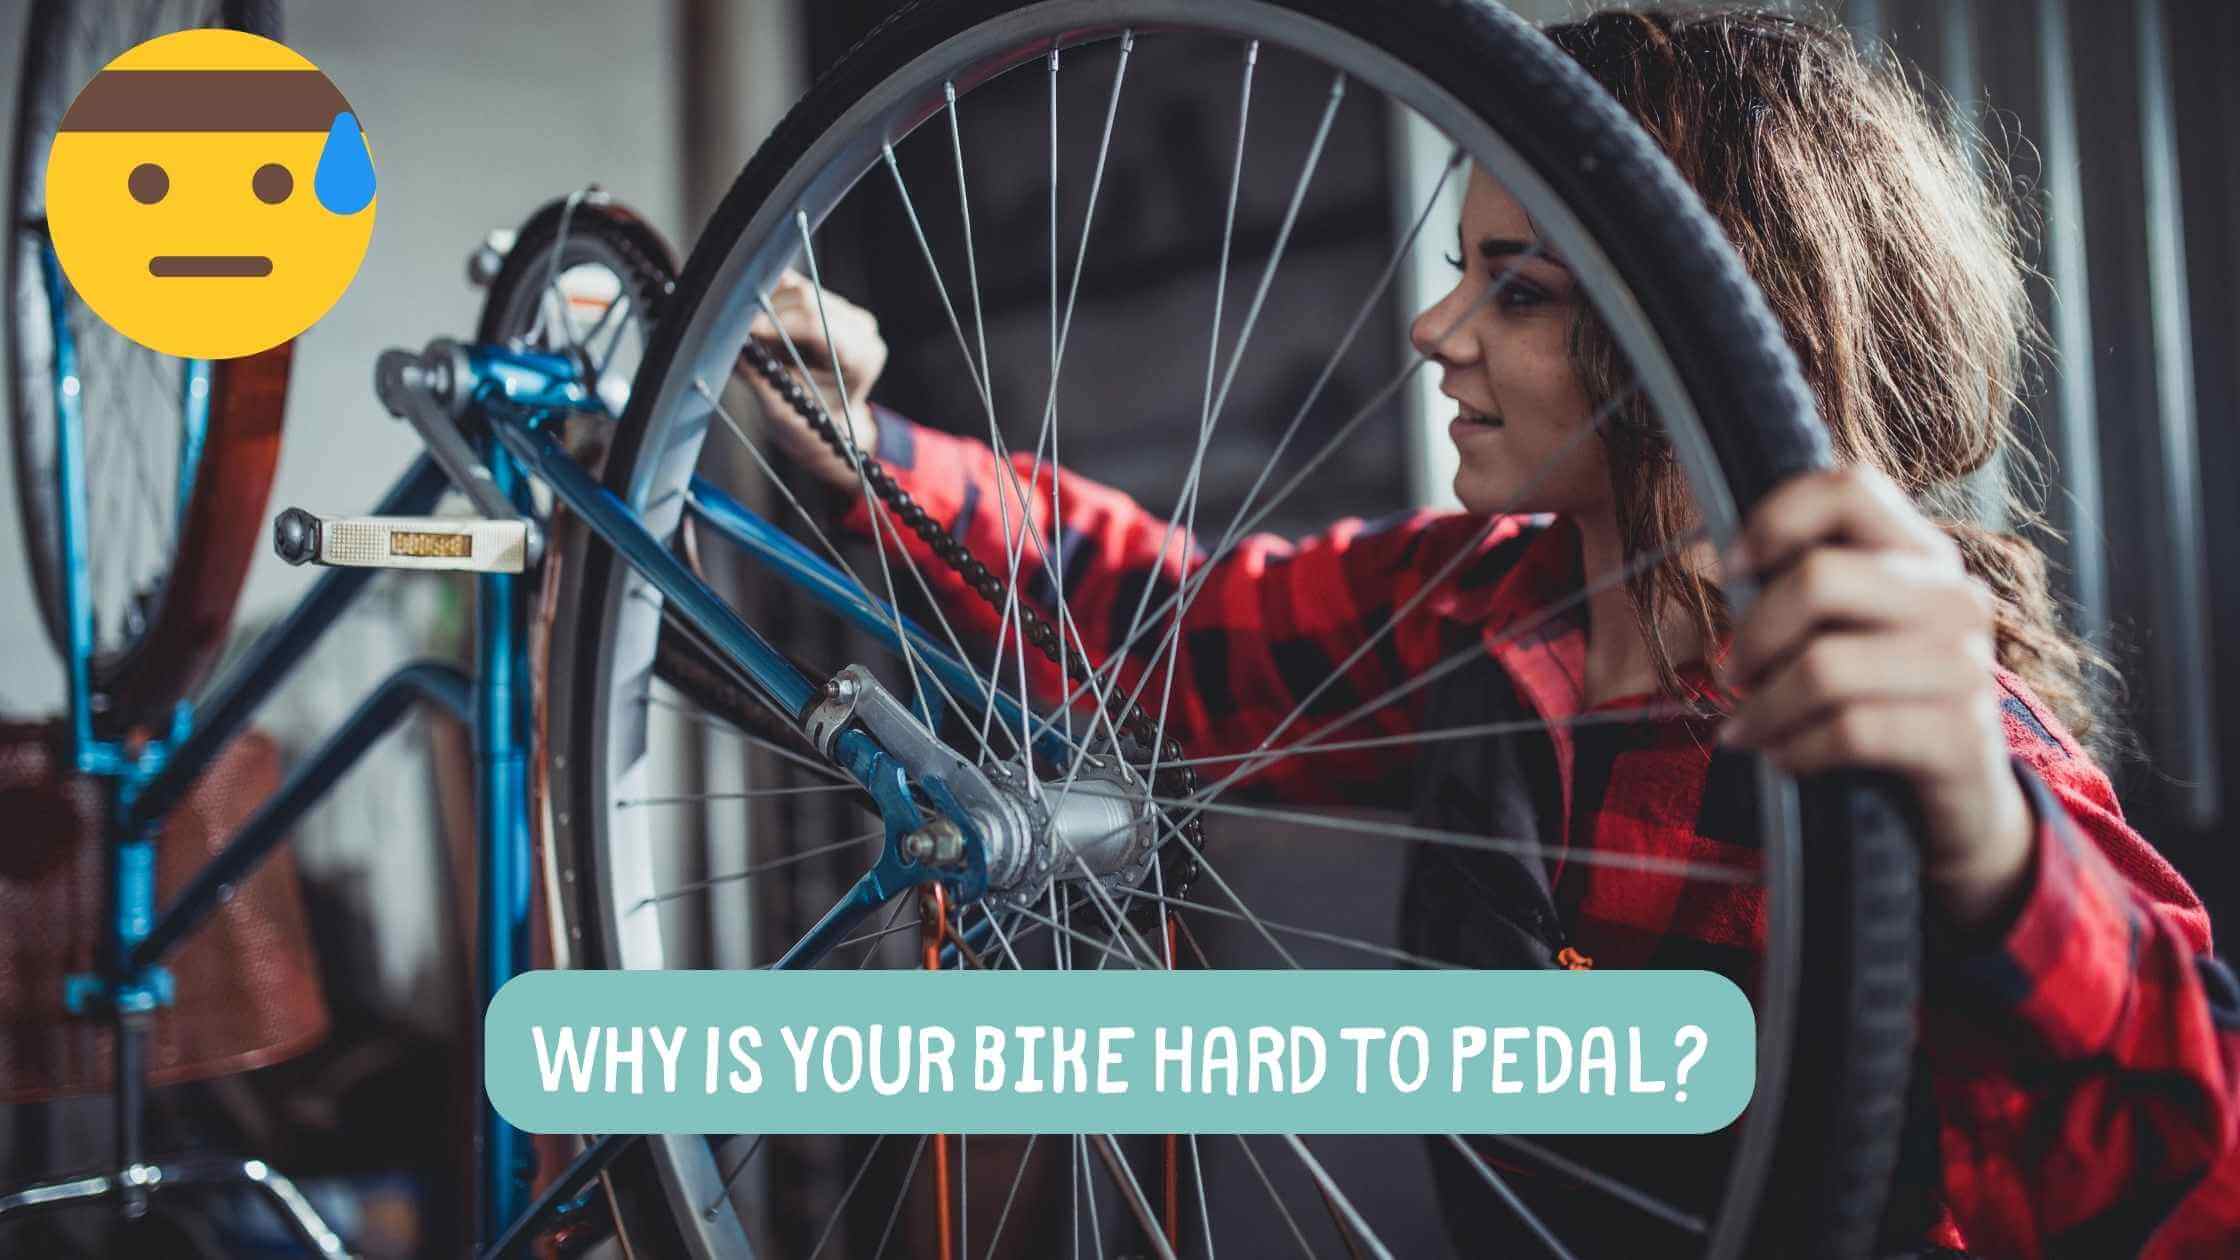 Bike is Hard to Pedal